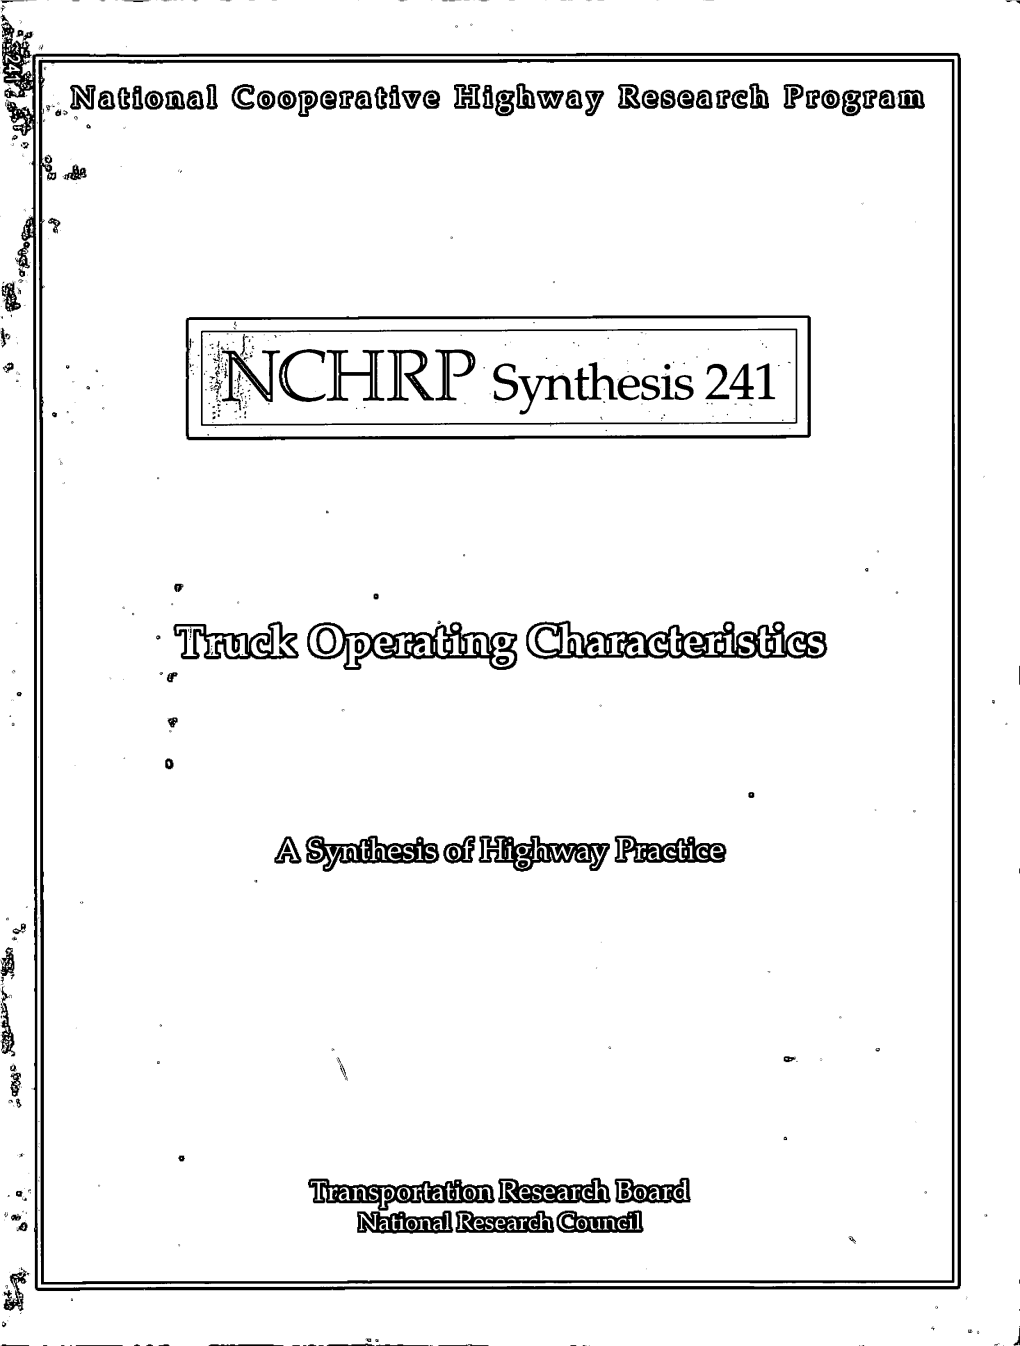 HRP.Synffiesi*S 241"'